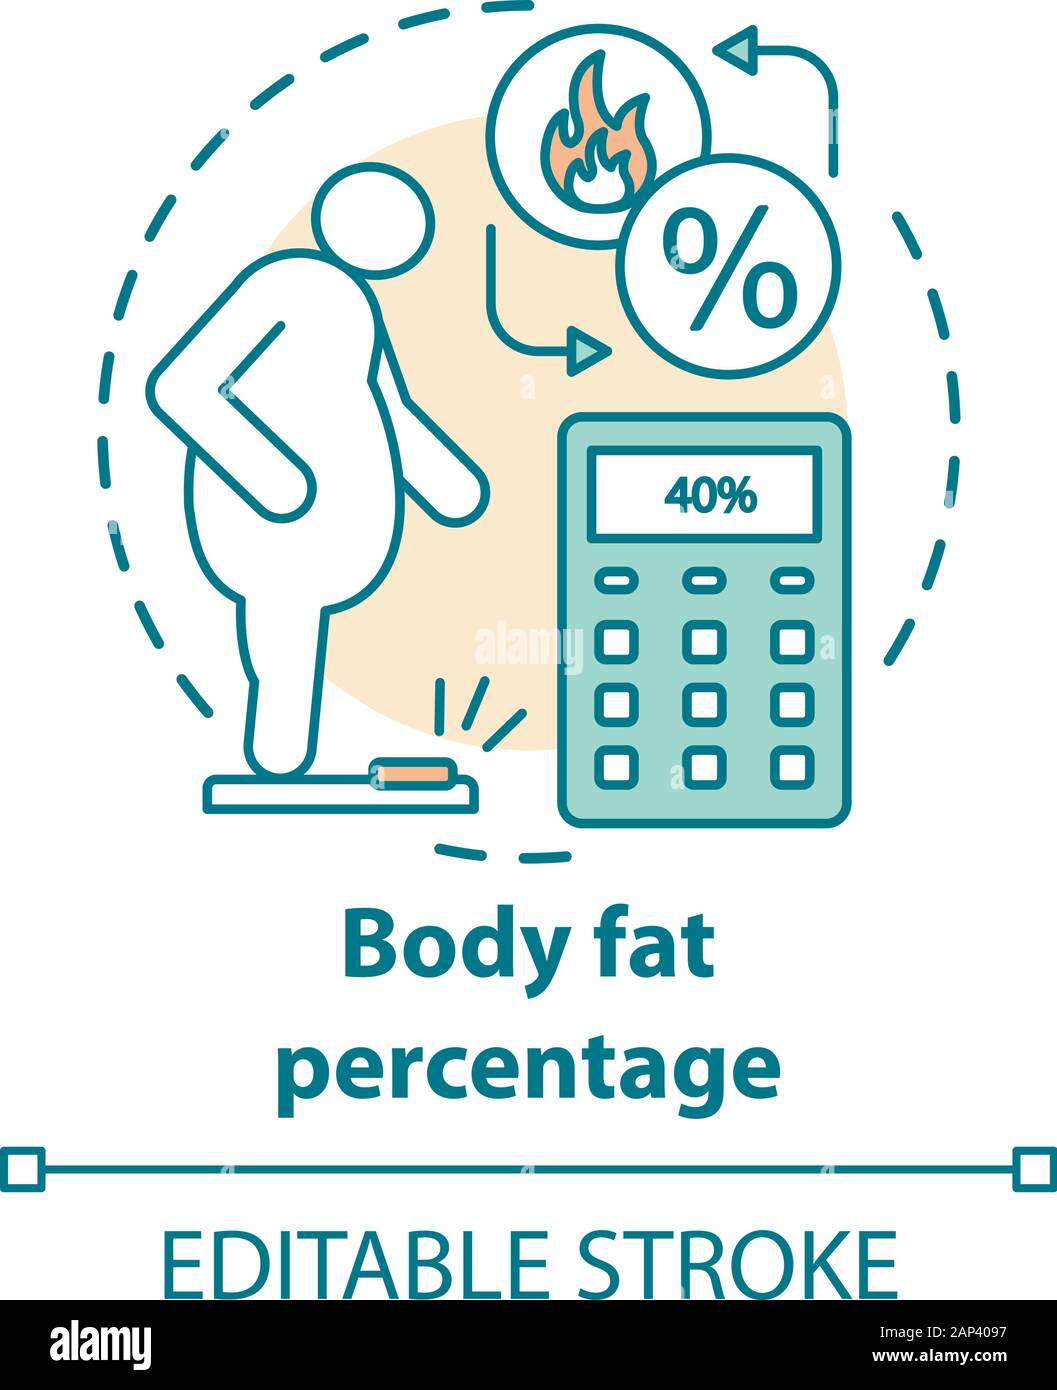 https://c8.alamy.com/comp/2AP4097/body-fat-percentage-check-concept-icon-obese-patient-on-scales-idea-thin-line-illustration-person-suffers-from-extraweight-calculating-fat-percent-2AP4097.jpg